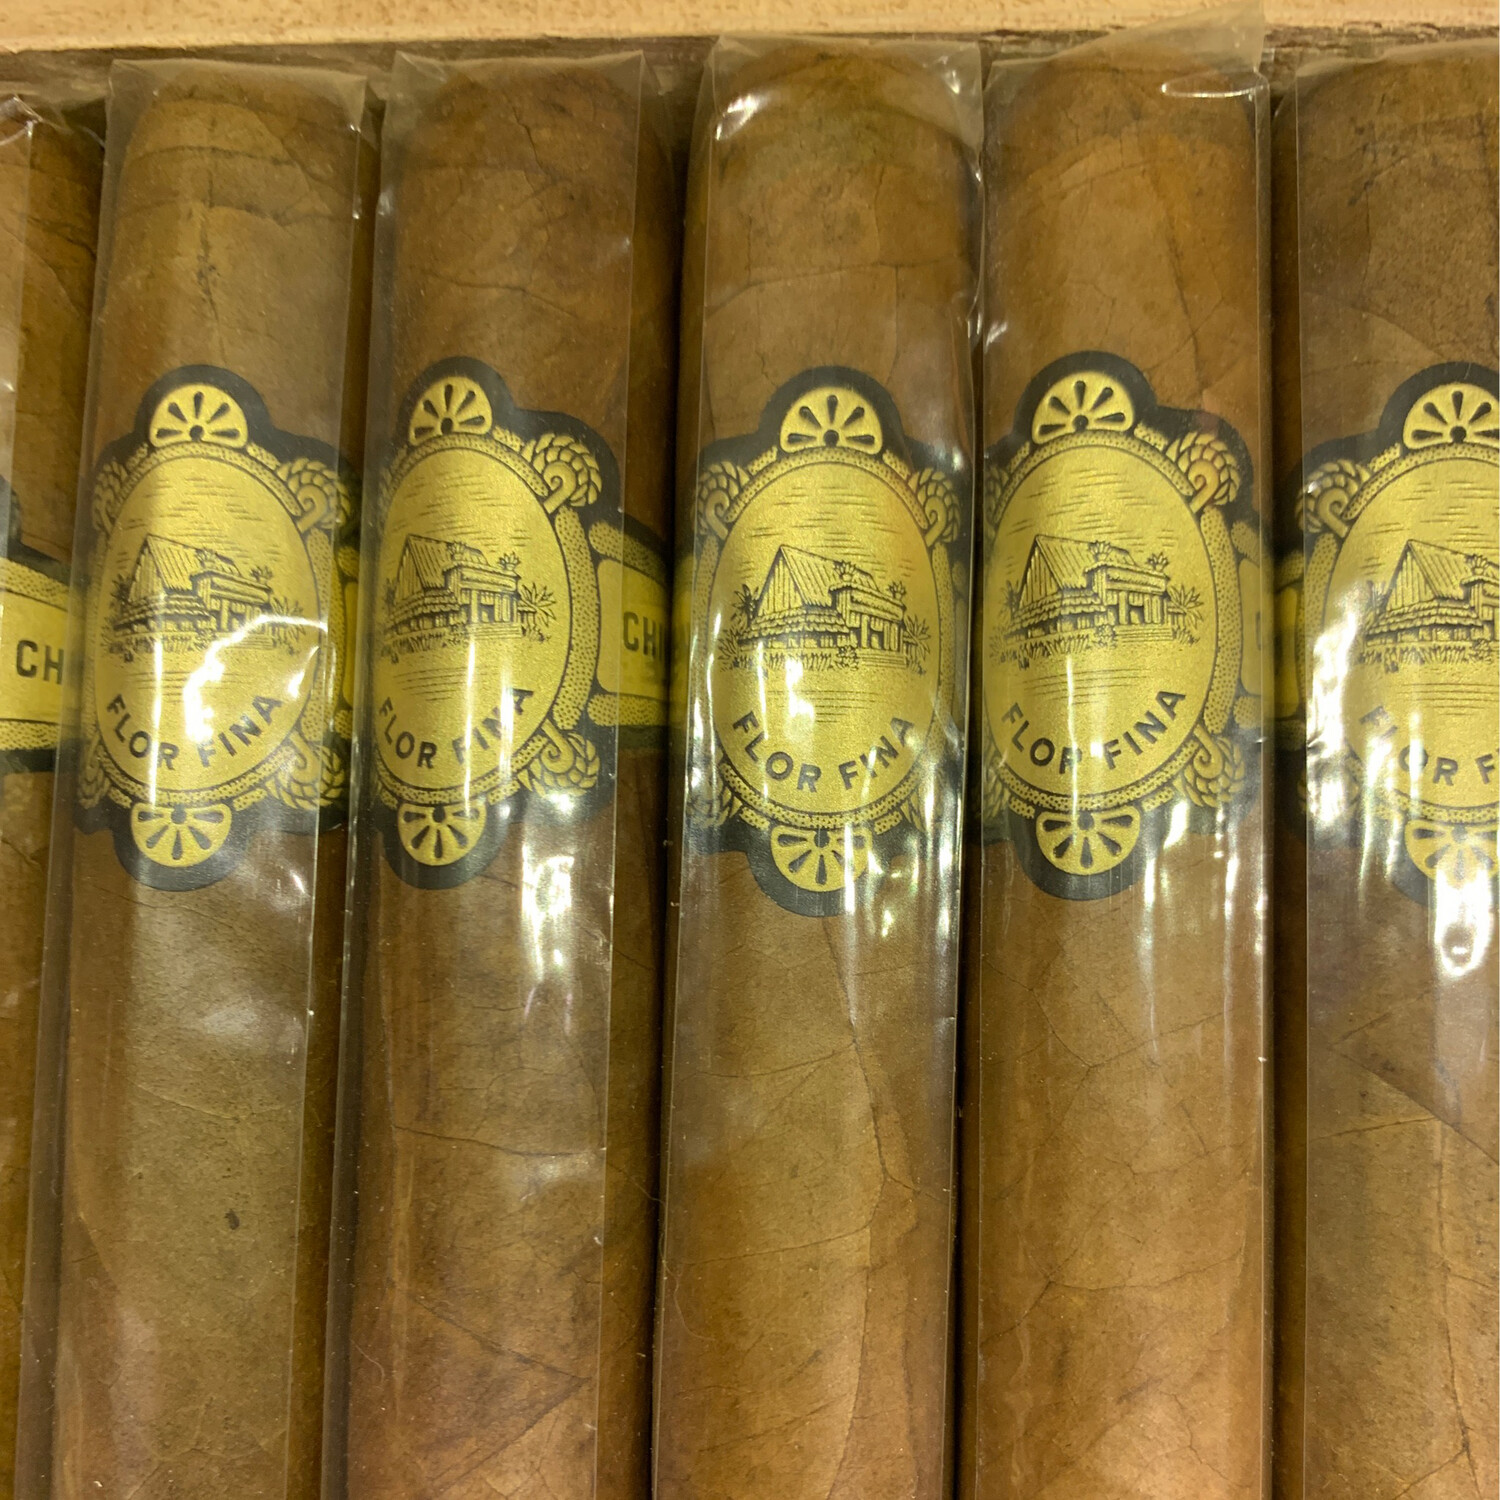 Chinchalle Warped Robusto/ Closeout